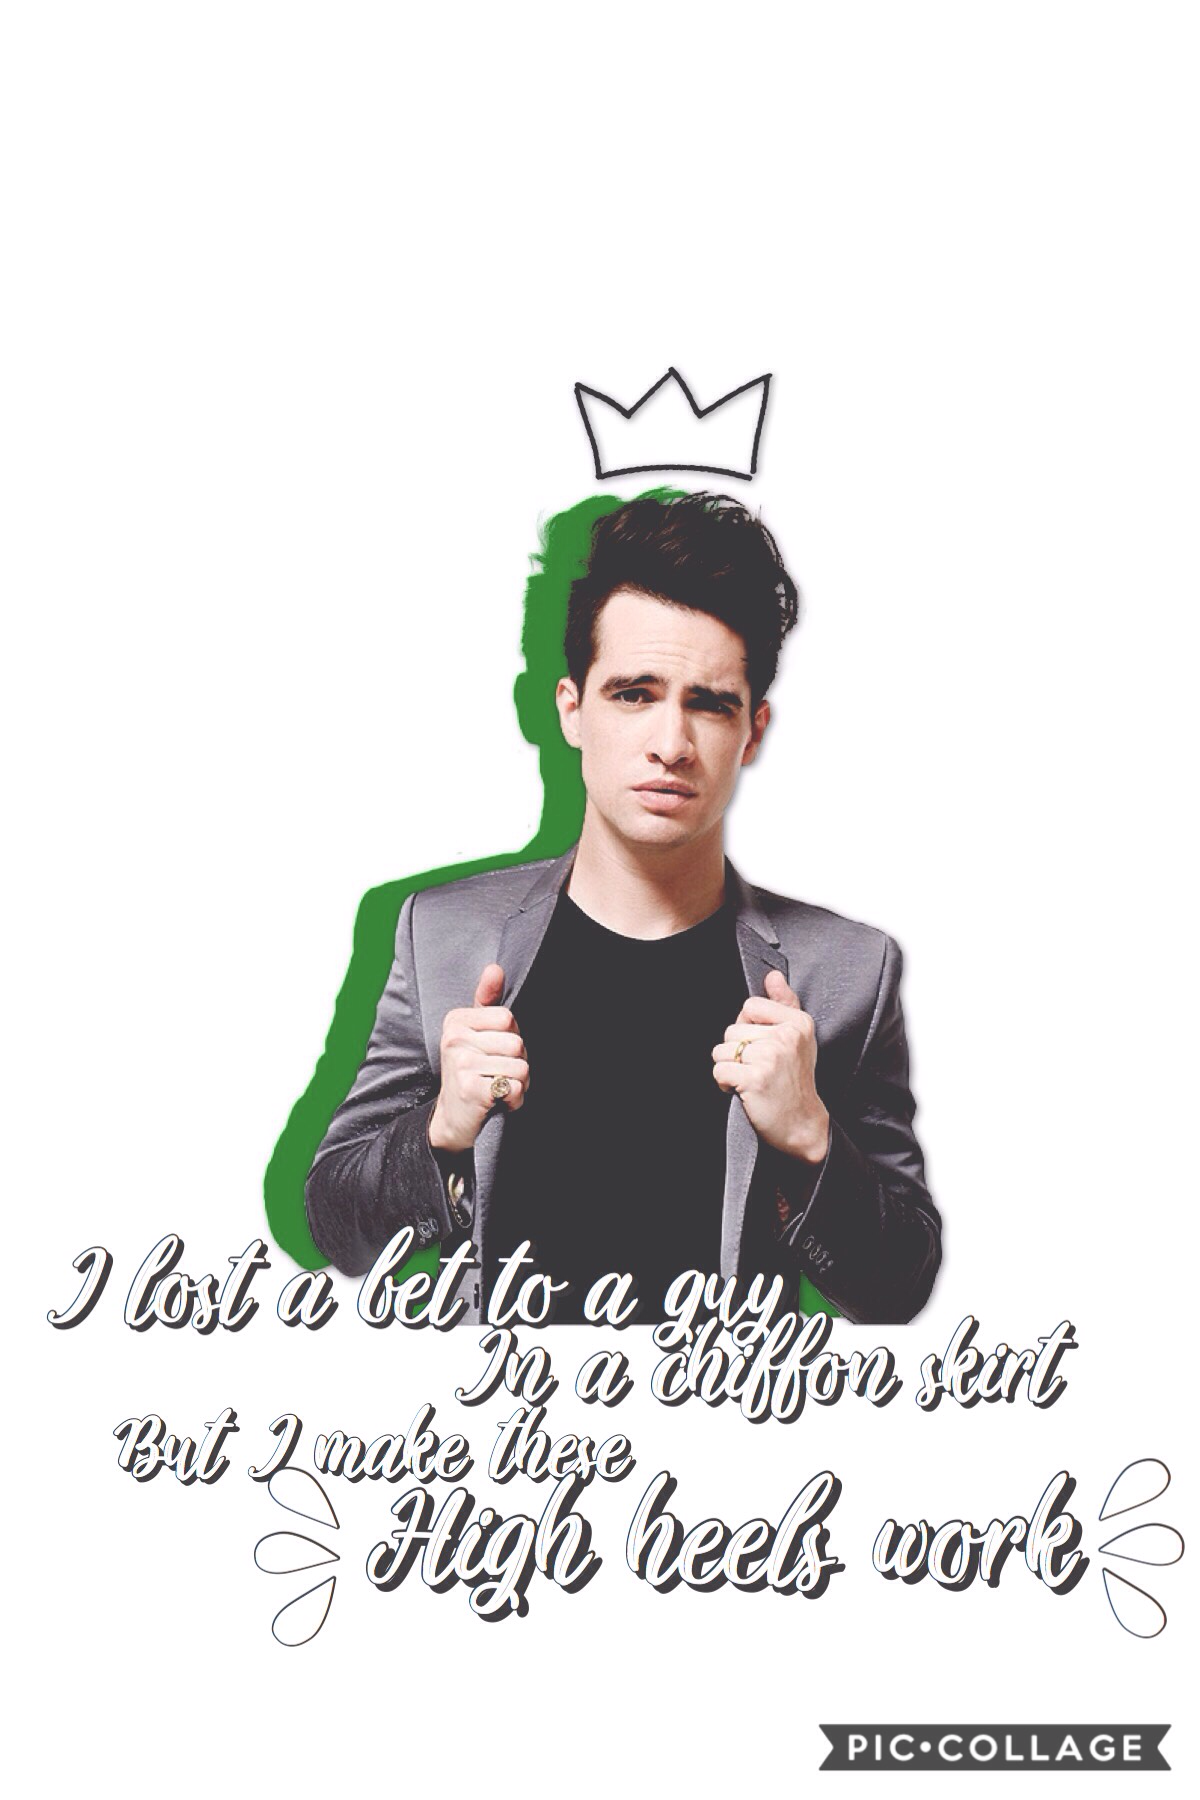 Panic! At the disco- Don't Threaten me With a Good Time 💚